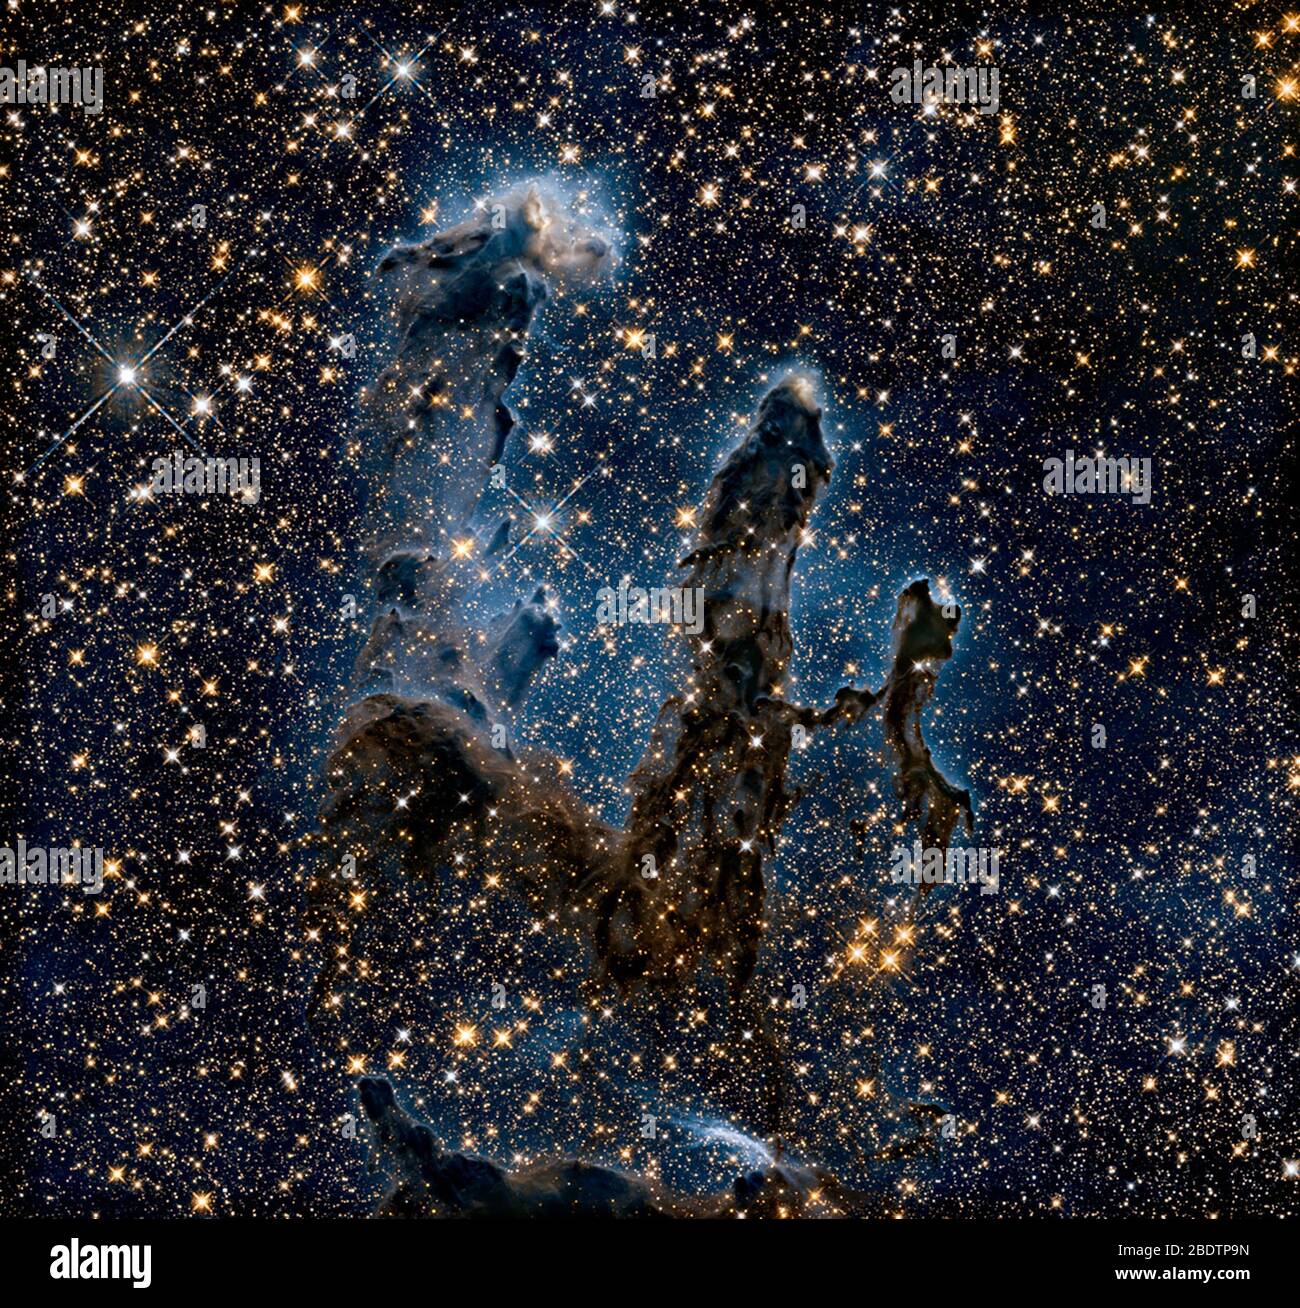 The NASA/ESA Hubble Space Telescope has revisited one of its most iconic and popular images: the Eagle Nebula's Pillars of Creation. This image shows the pillars as seen in infrared light, allowing it to pierce through obscuring dust and gas and unveil a more unfamiliar, but just as amazing, view of the pillars. In this ethereal view, the entire frame is peppered with bright stars, and baby stars are revealed being formed within the pillars themselves. The ghostly outlines of the pillars seem much more delicate and are silhouetted against an eerie blue haze. Hubble also captured the pillars in Stock Photo